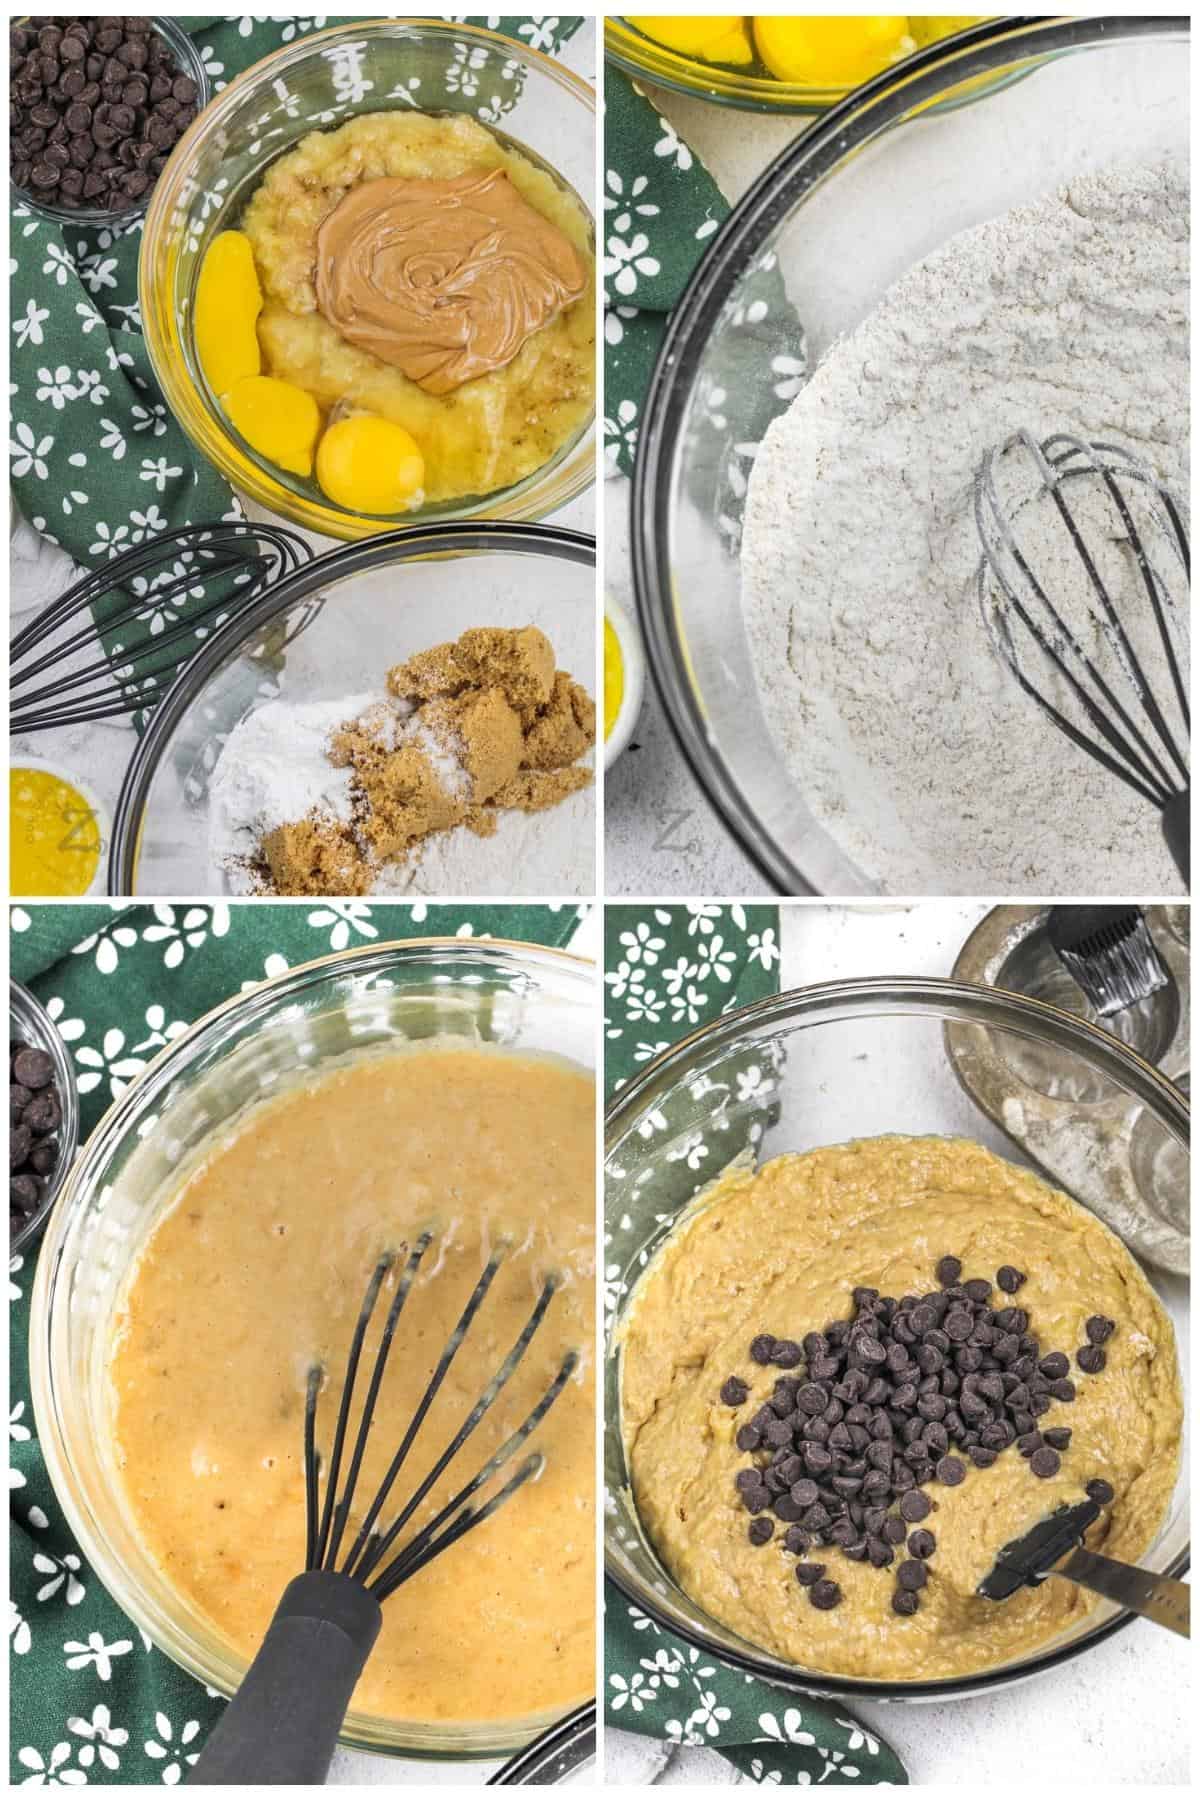 process of mixing wet and dry ingredients together to make Peanut Butter Banana Muffins